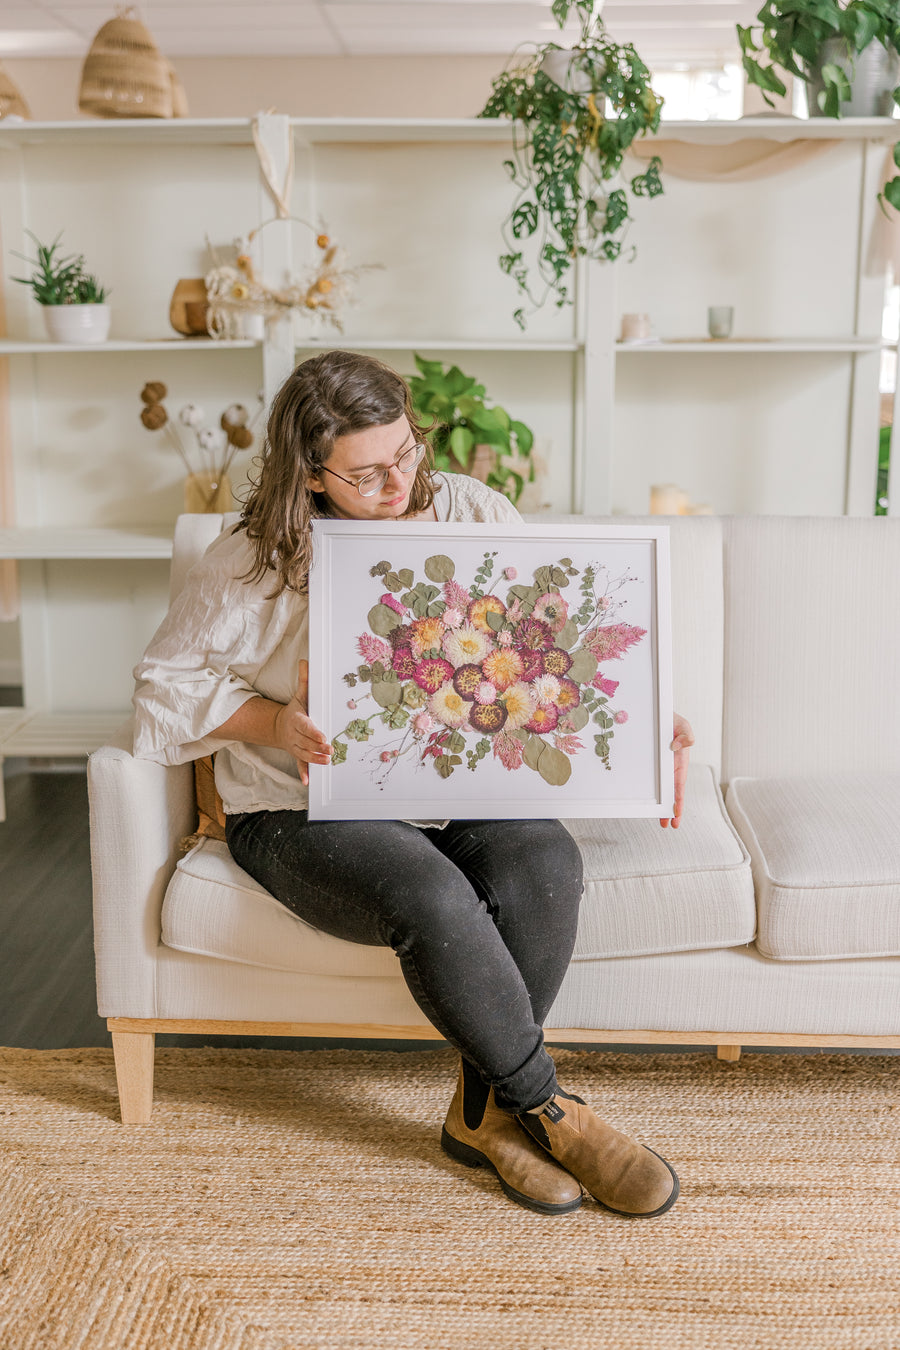 A woman sits holding her bouquet preservation she received from the Pressed Bouquet Shop. It features pink and white pressed flowers with pressed greenery on a white background and in a white frame.